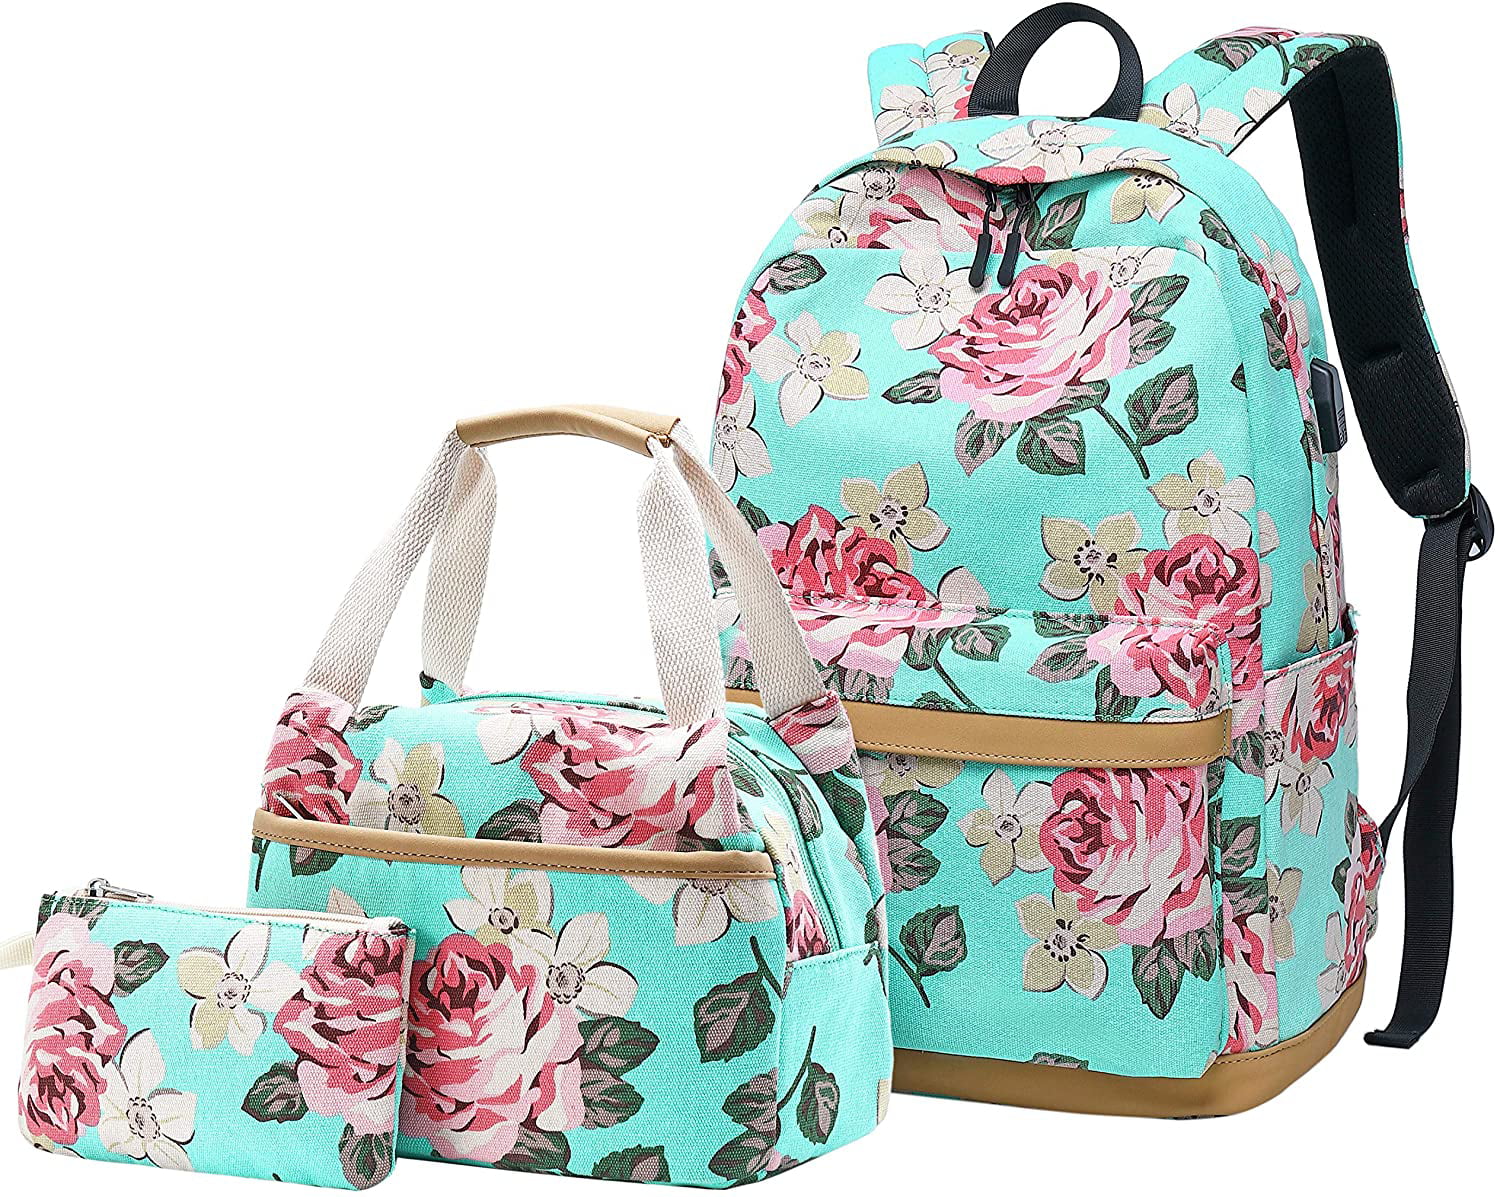 3 in 1 with Lunch Tote Bag Clutch Purse Canvas Bookbags 14 Laptop Backpack Floral Backpack Set 